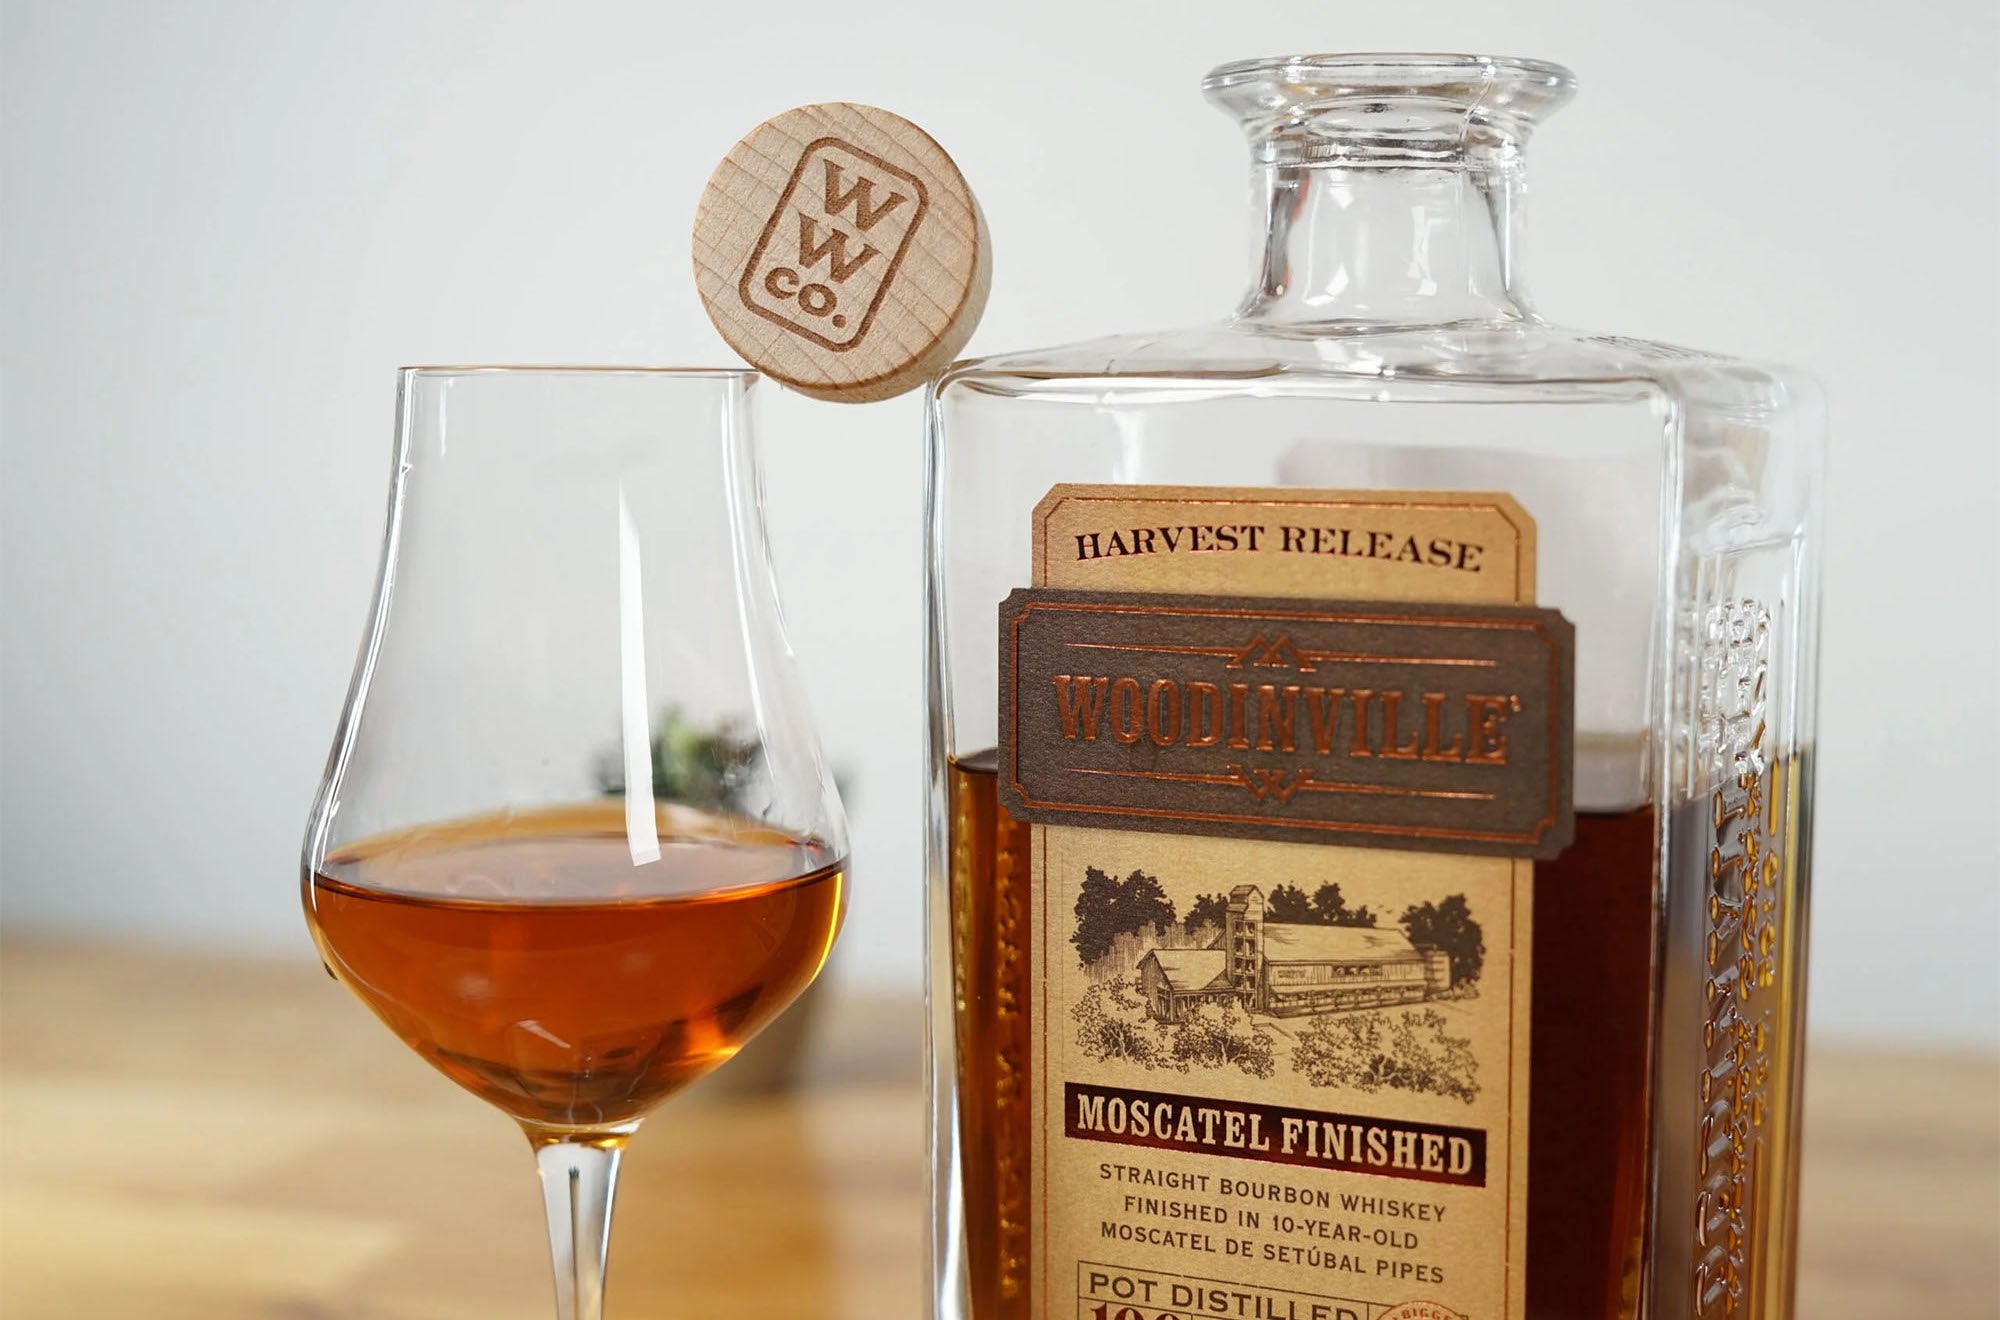 Woodinville Straight Bourbon Whiskey- Moscatel Finished